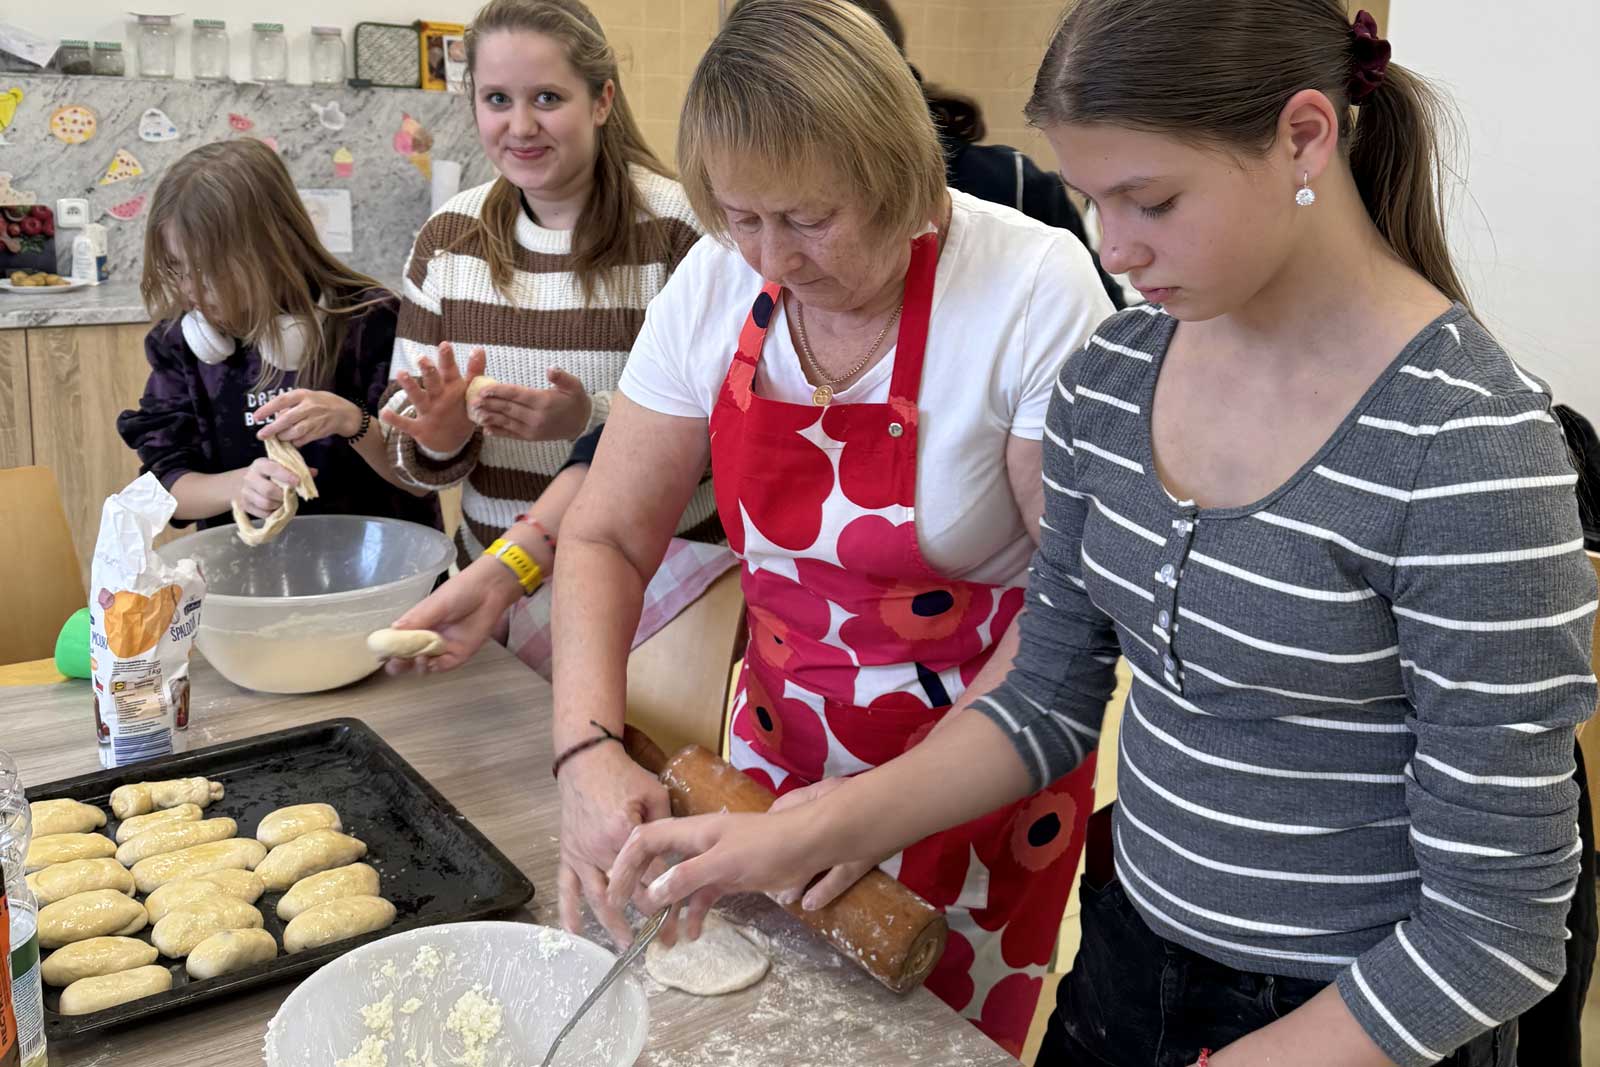 Sweet or savoury, the weekly cooking class is extremely popular with the children.